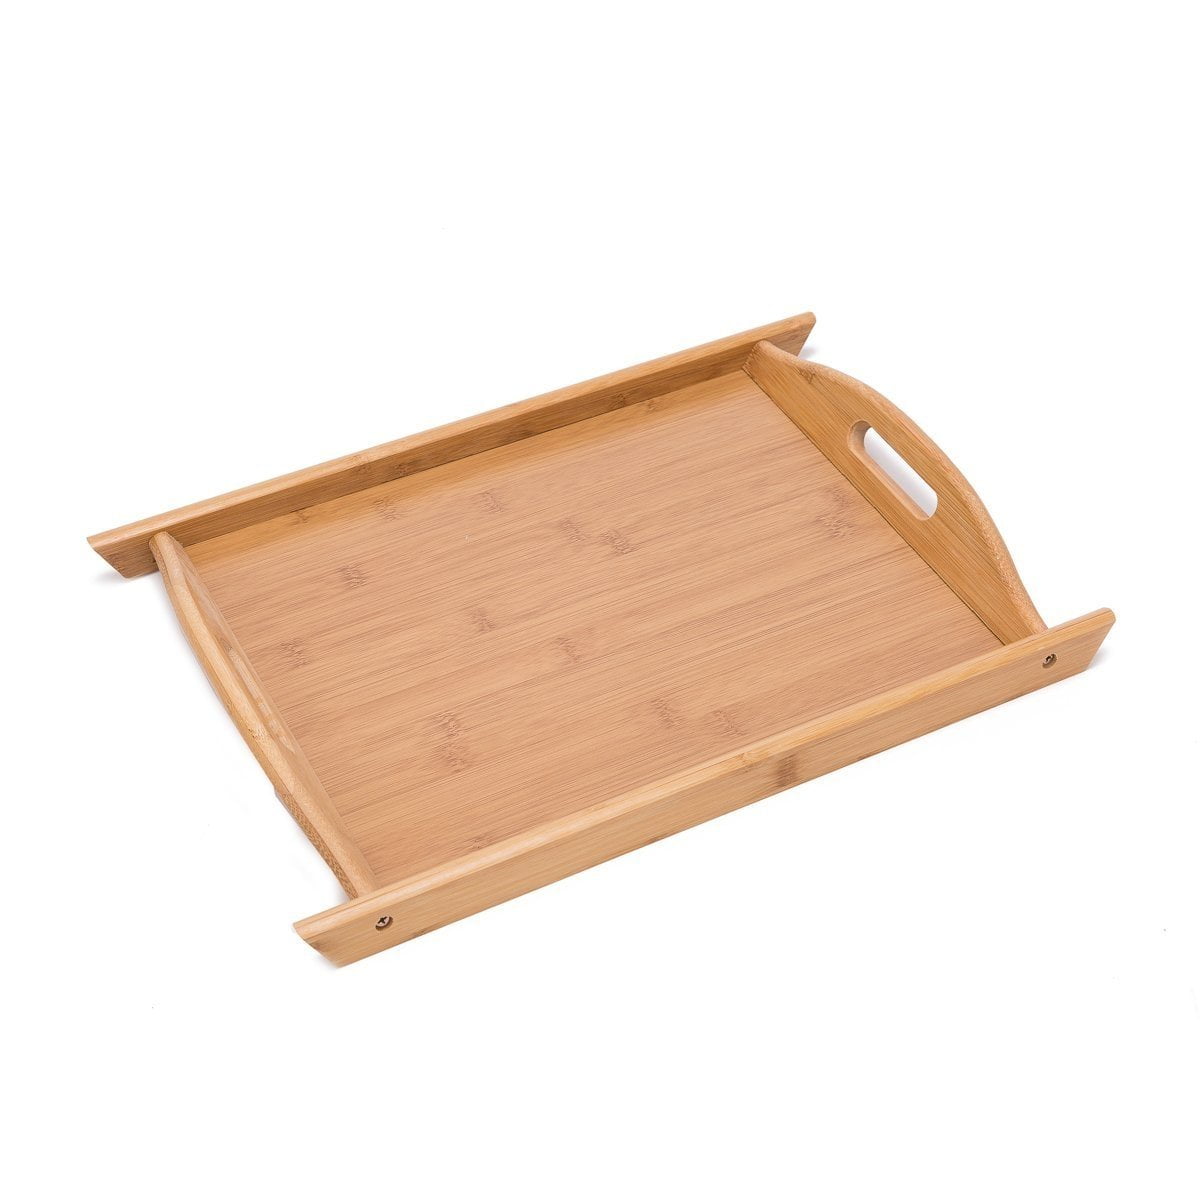 Details about   THY COLLECTIBLES Bamboo Breakfast Tray Food Buller Serving Tray With Handles...